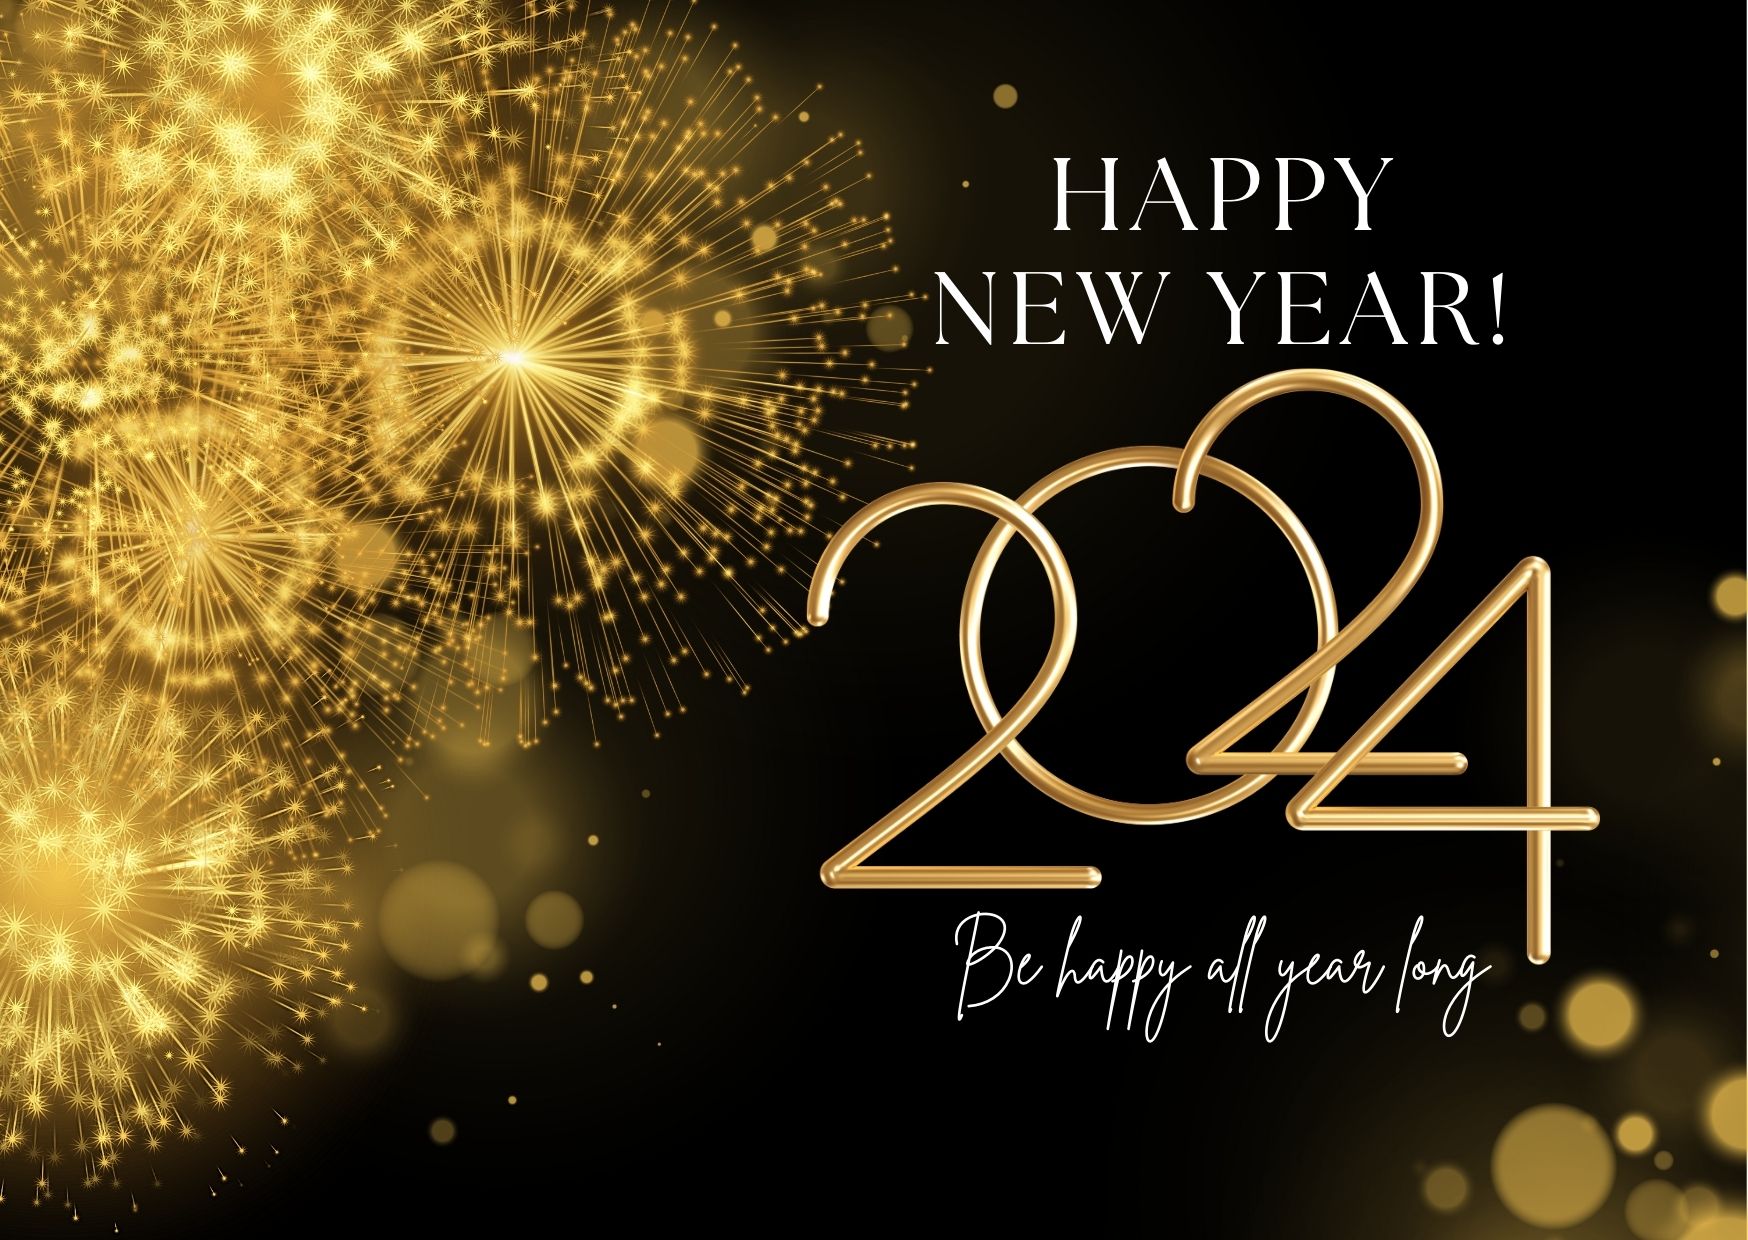 Be Happy New Year Greeting Card Image Hd Free